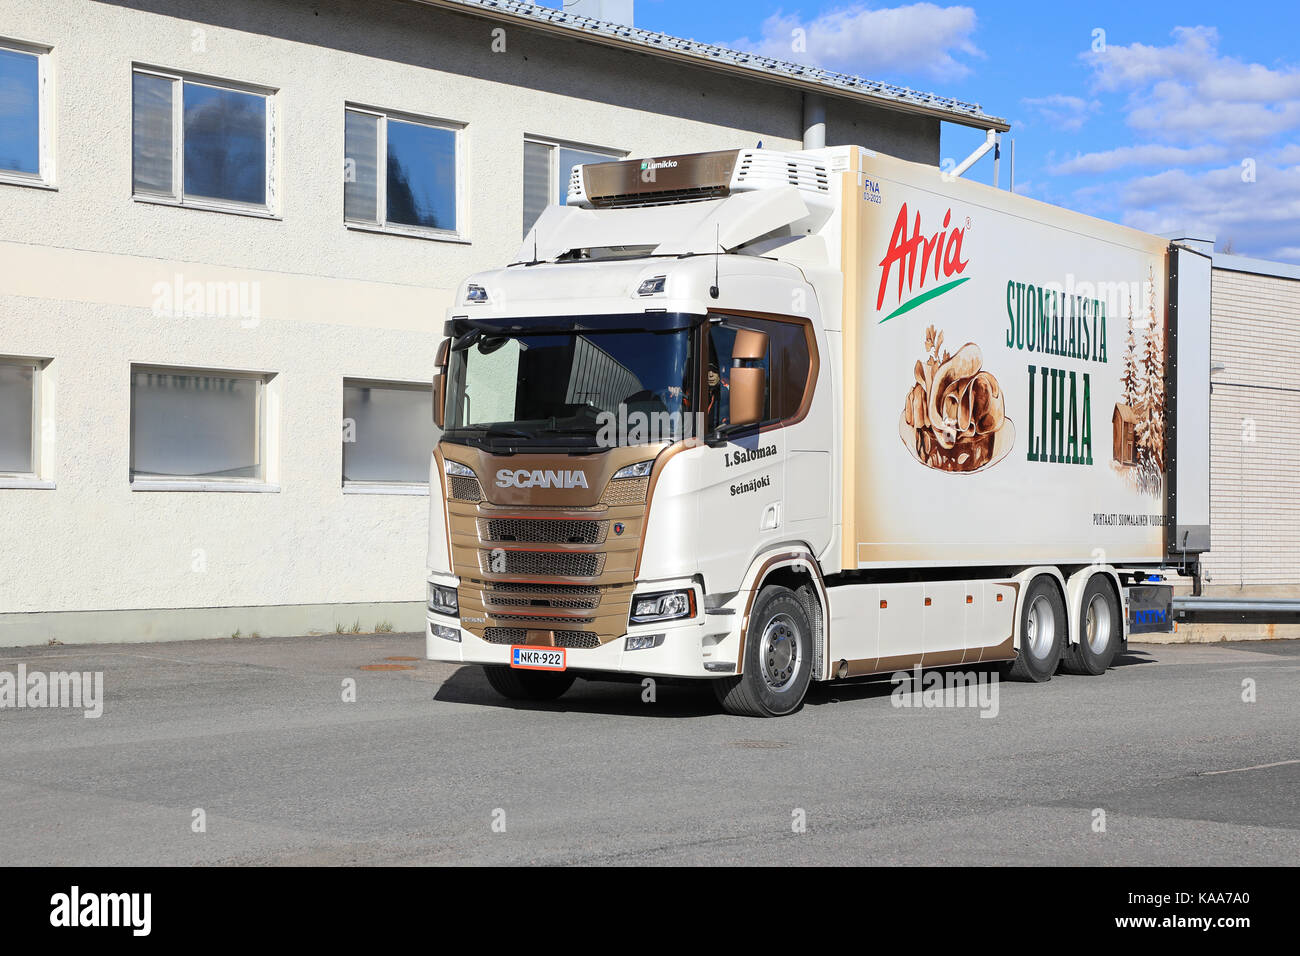 FORSSA, FINLAND - MAY 1, 2017: Stylish Next Generation Scania R500 of I Salomaa for transporting foodstuff at the loading zone of a warehouse. Stock Photo